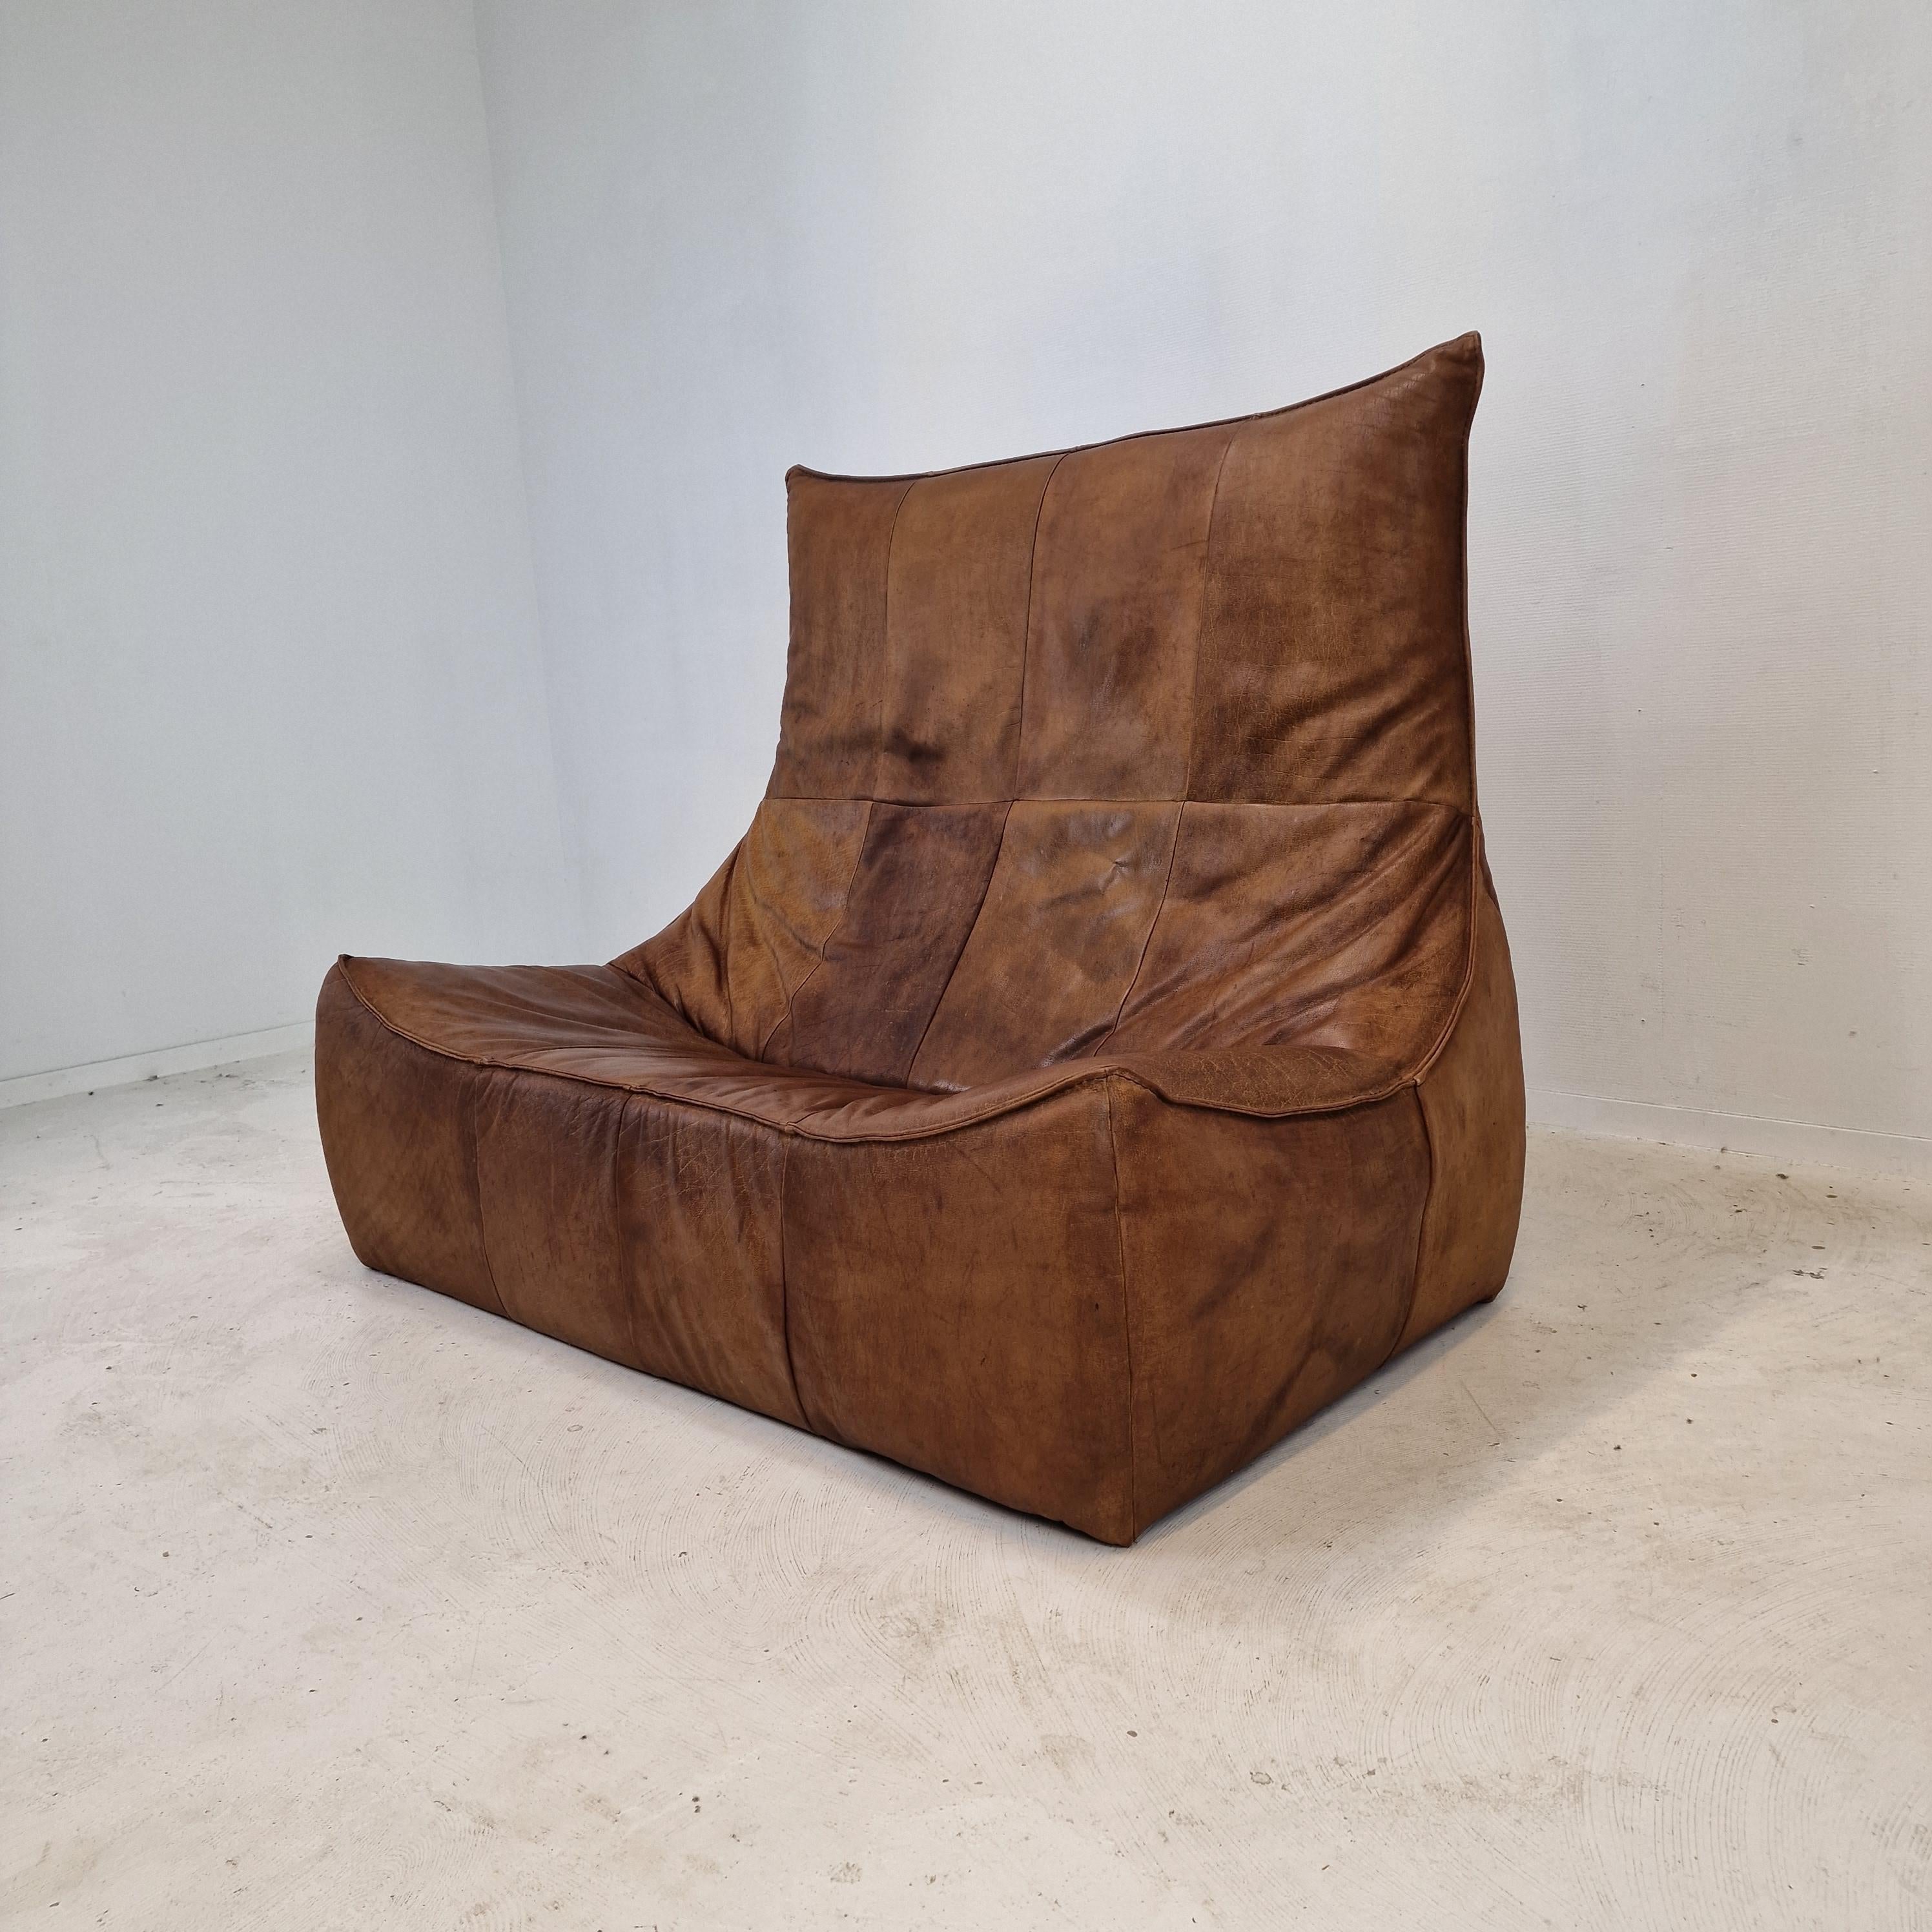 Dutch Montis “The Rock” Sofa In Brown Leather By Gerard Van Den Berg, 1970s For Sale